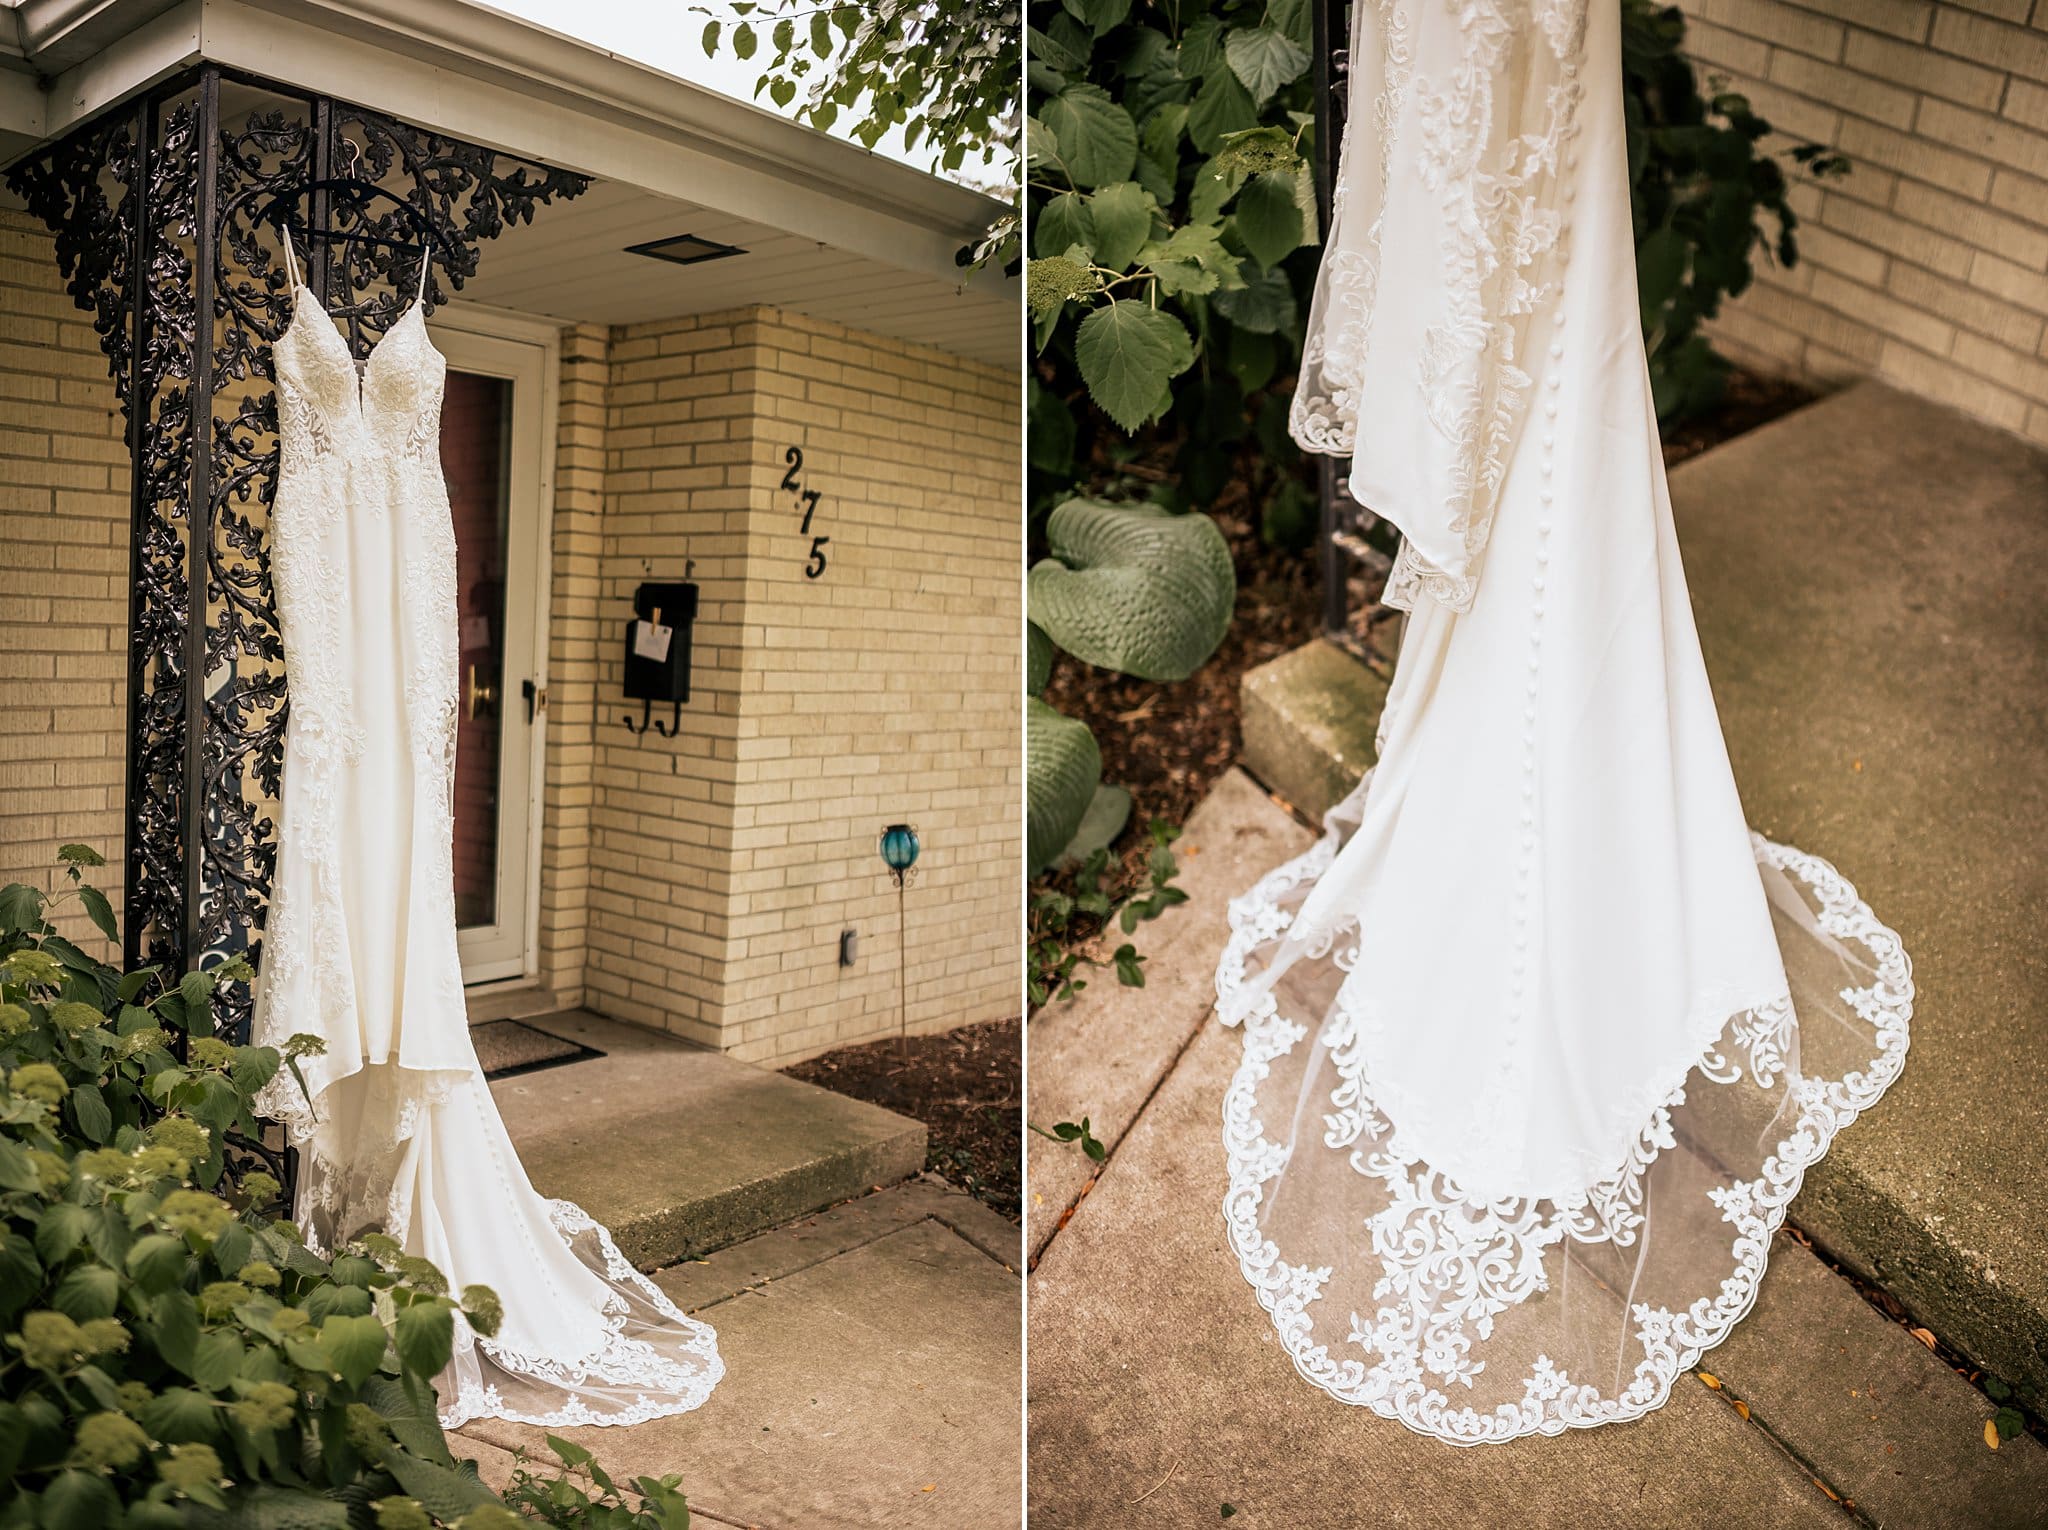 hanging wedding dress up outside the front door